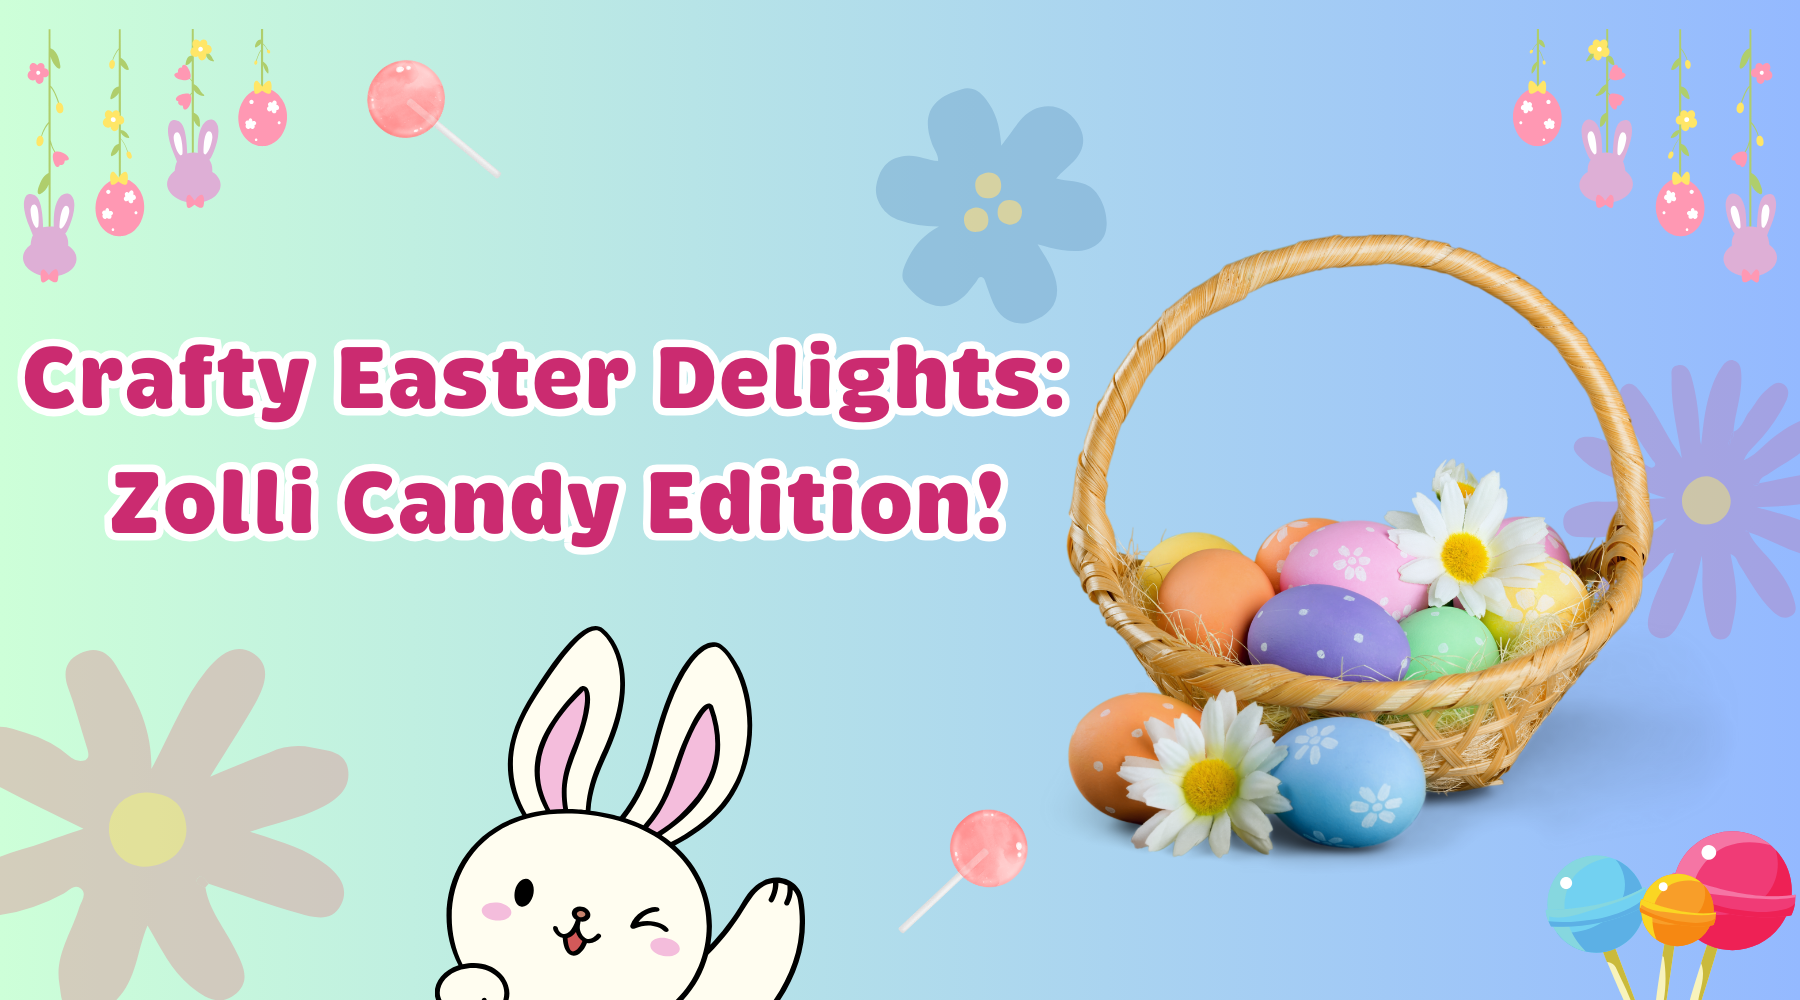 We've curated a collection of our sweetest Easter crafts, all in one convenient spot to inspire creativity and family fun.